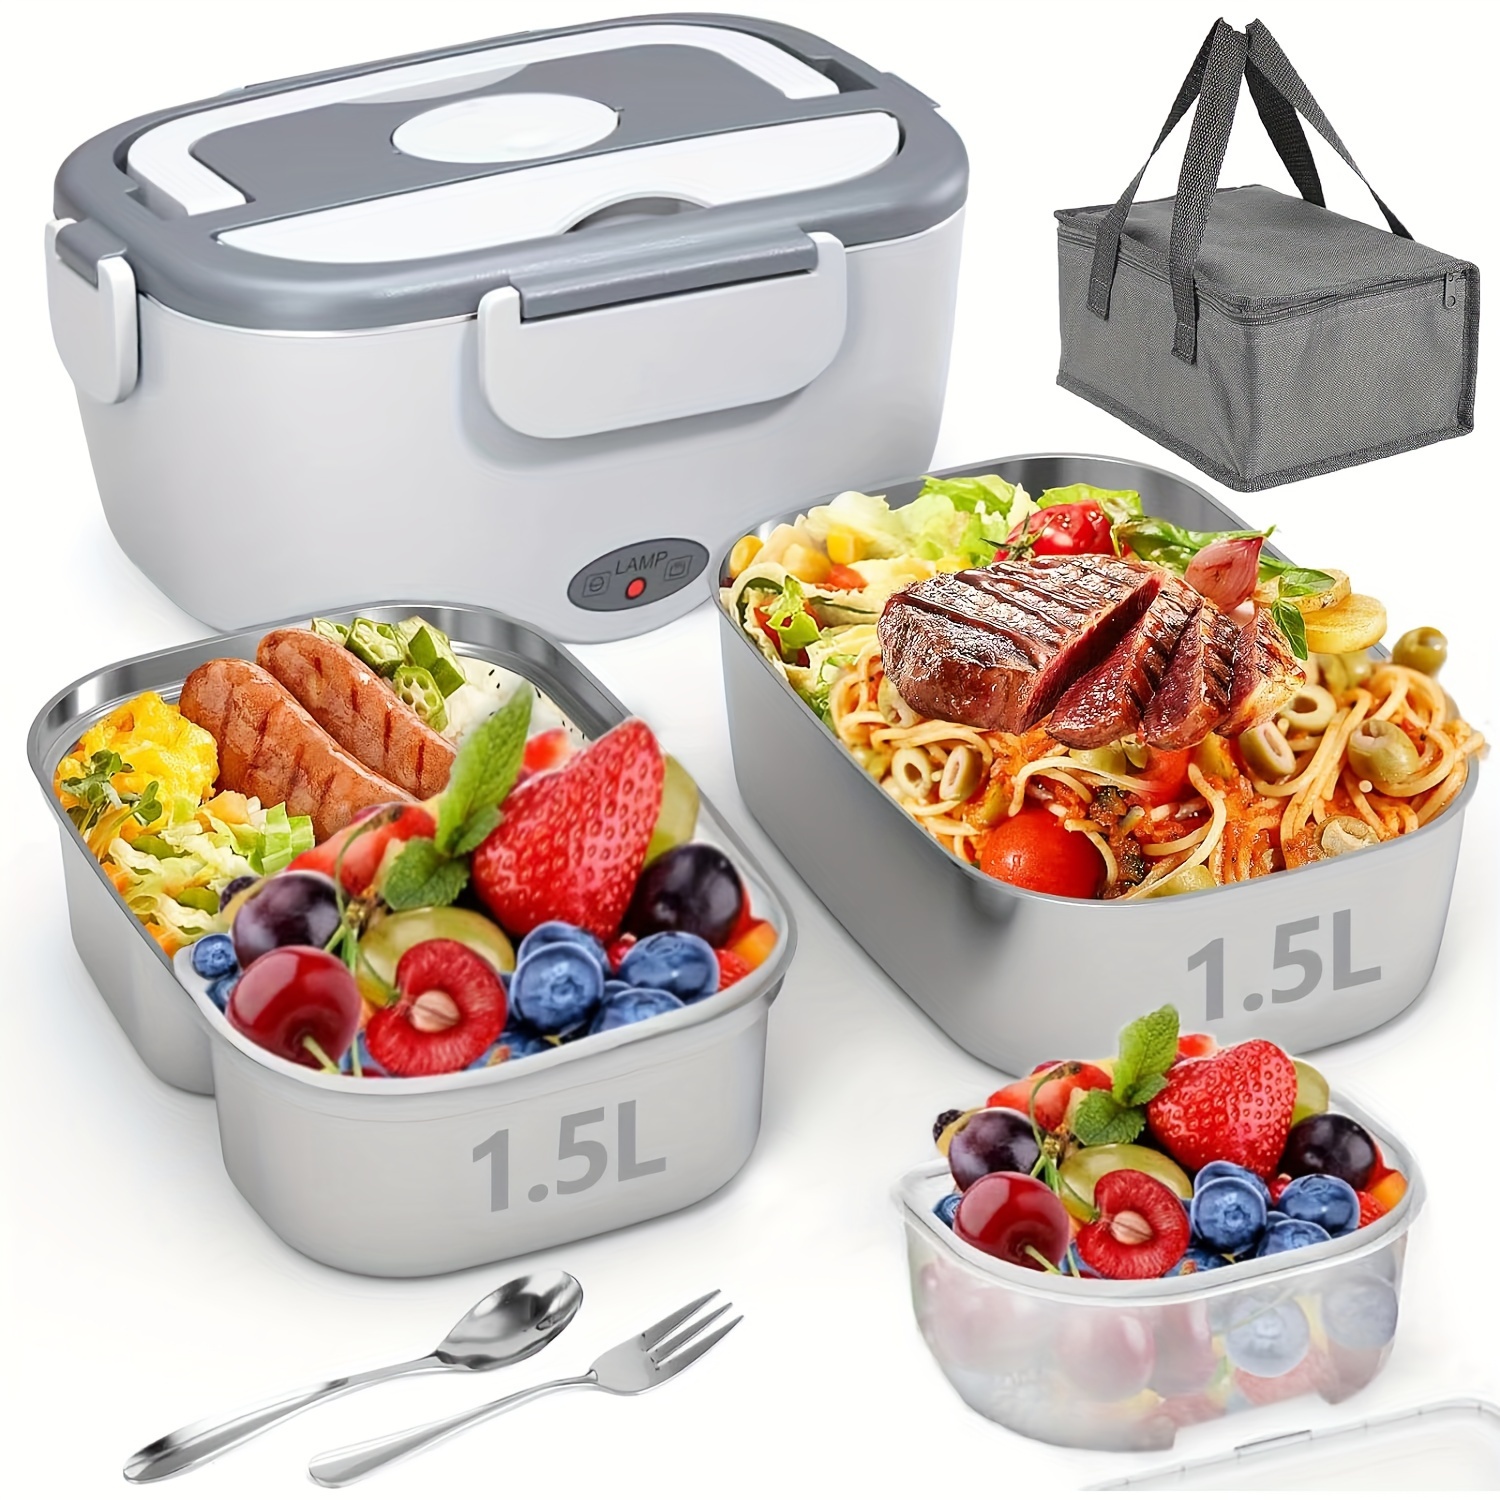 

Electric Lunch Box - Portable Fast Heating Lunch Box (12v/24v/110v) - 1.5l Stainless Steel Container Adult Food Warmer - Suitable For Cars, Trucks, Offices And Outdoors (white)